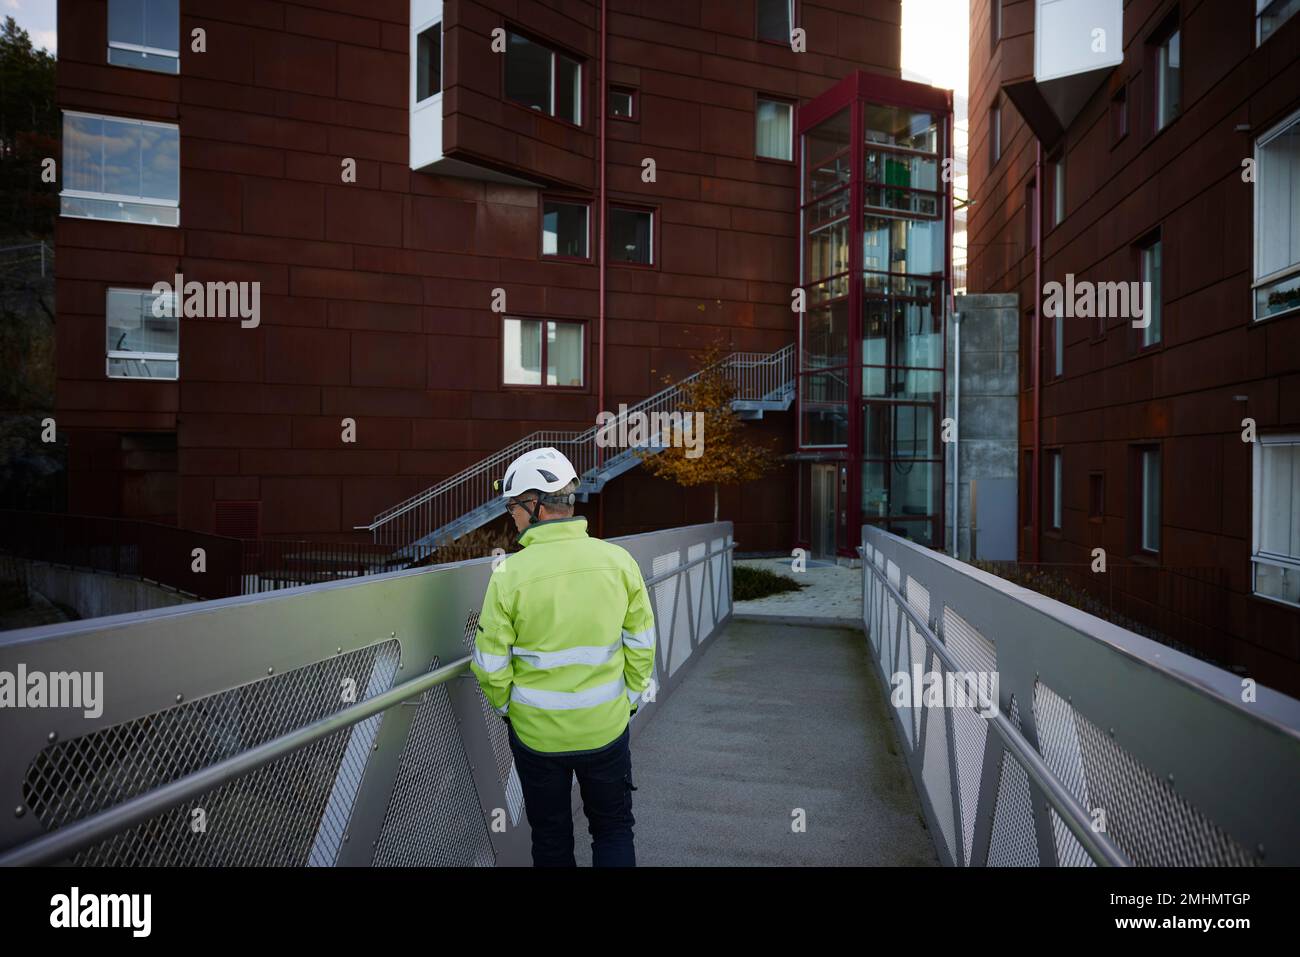 Construction worker standing on bridge in residential area Stock Photo